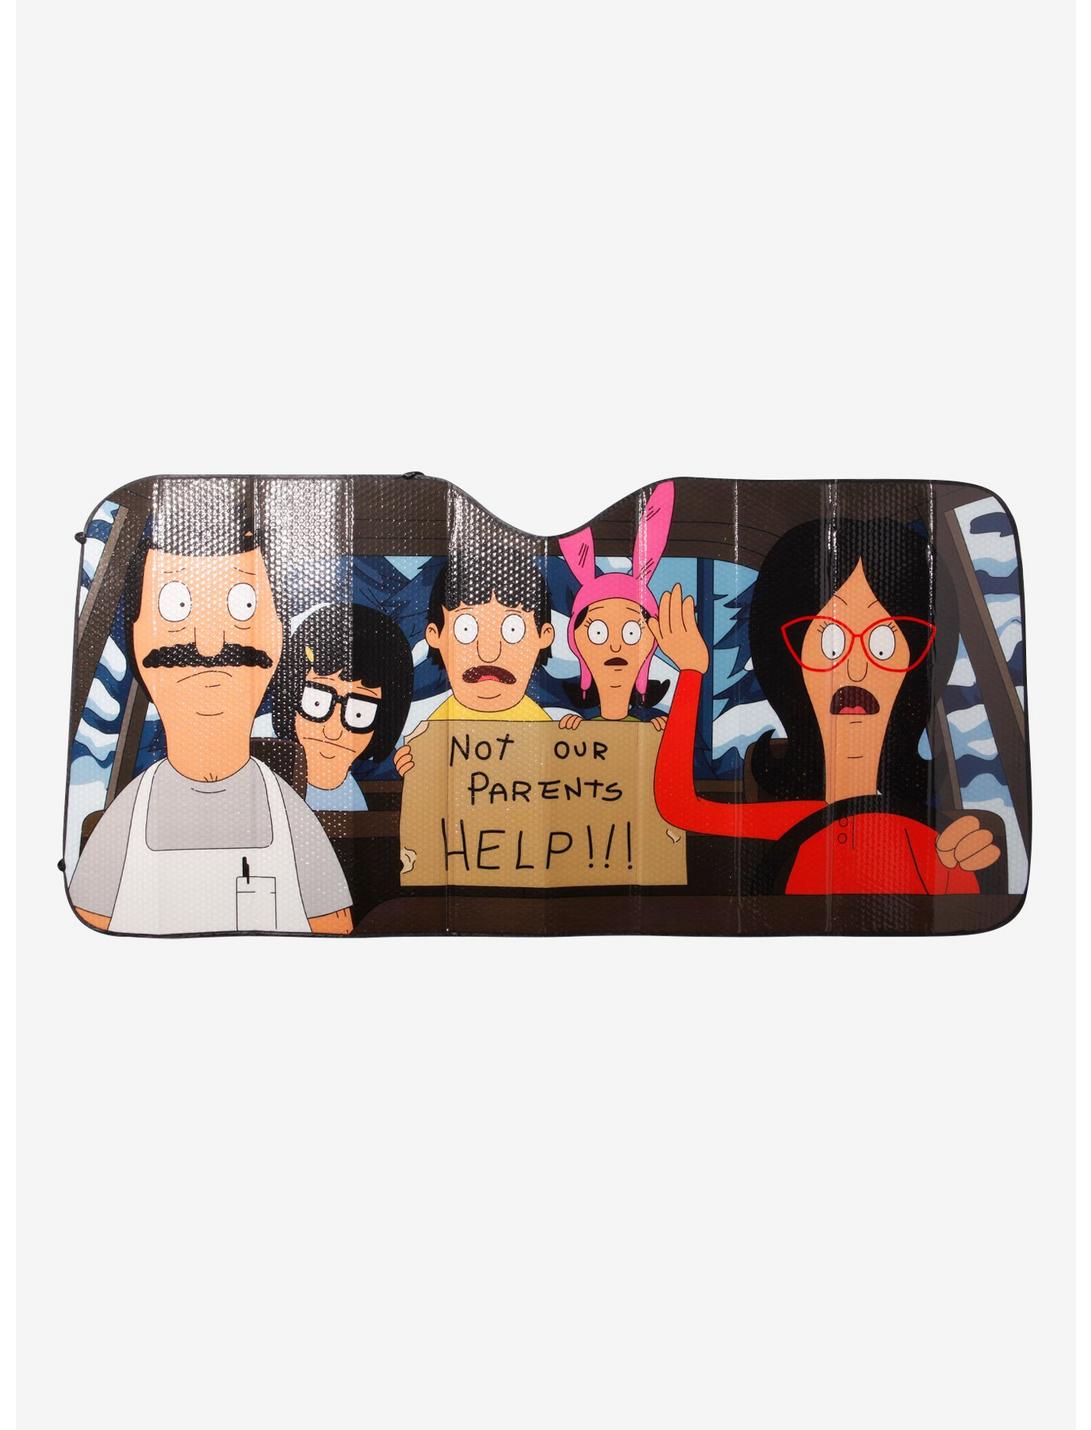 Bobs Burgers Cartoon Characters Large Iron on Heat Transfer Patch 